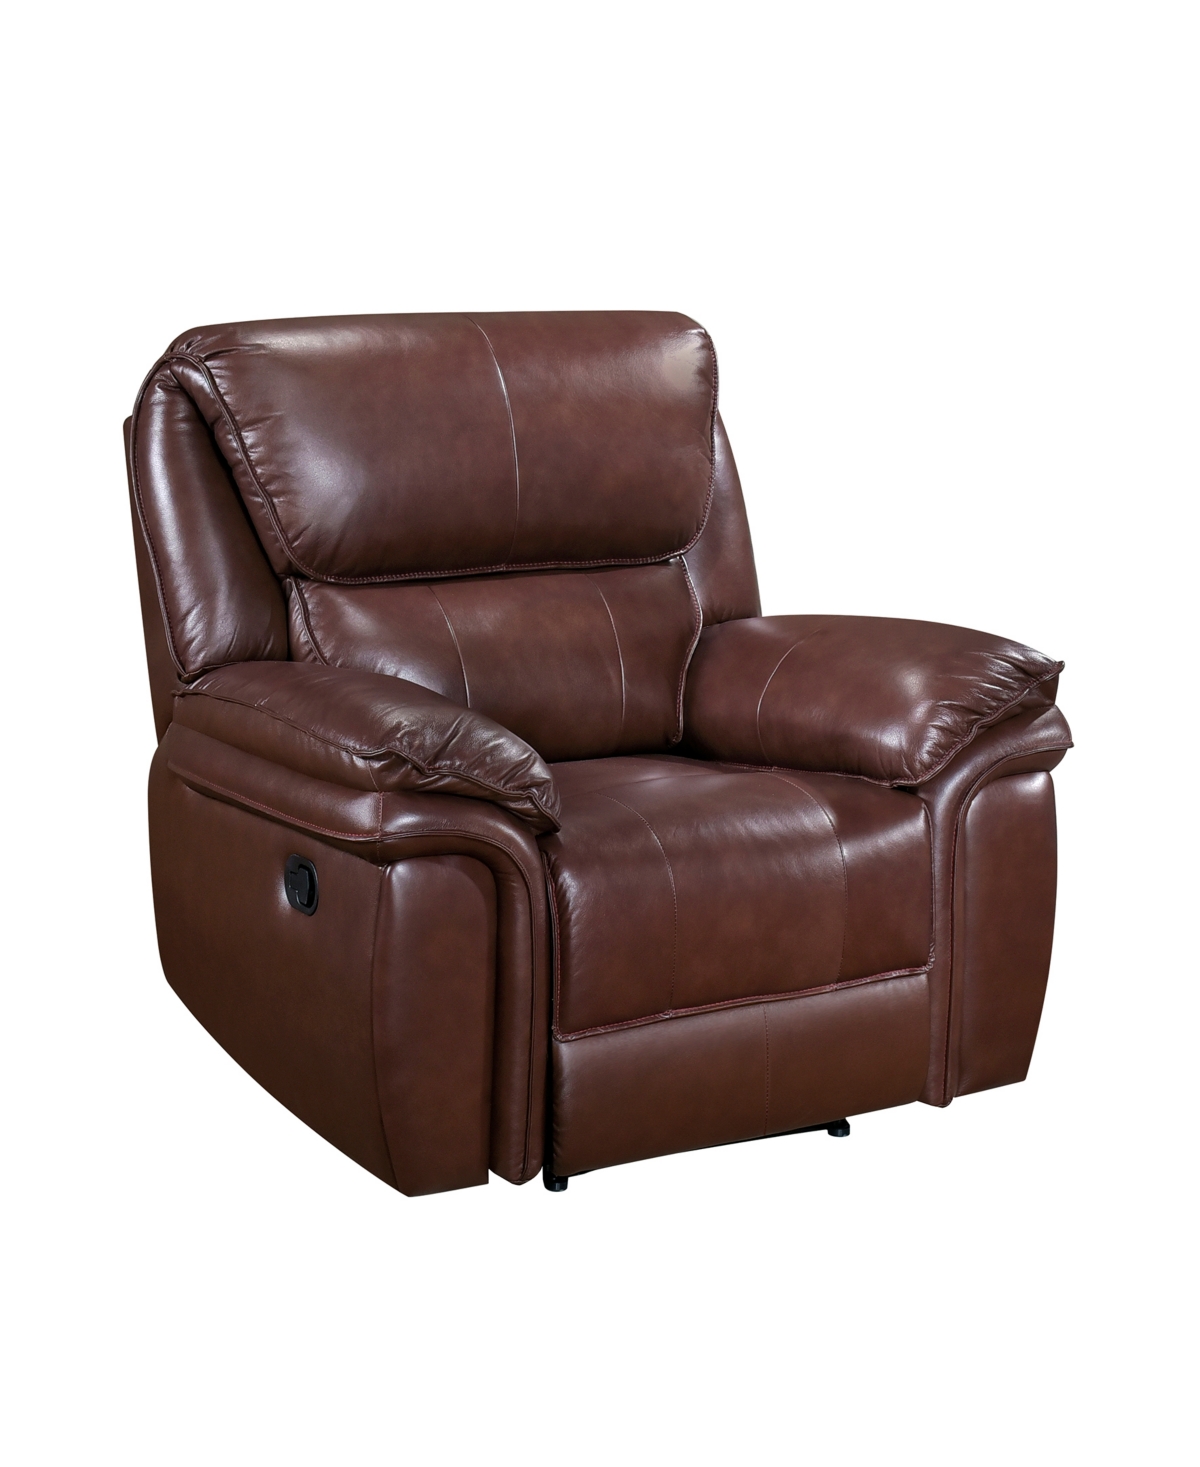 Homelegance White Label Colin 43" Leather Match Lay Flat Reclining Chair In Brown